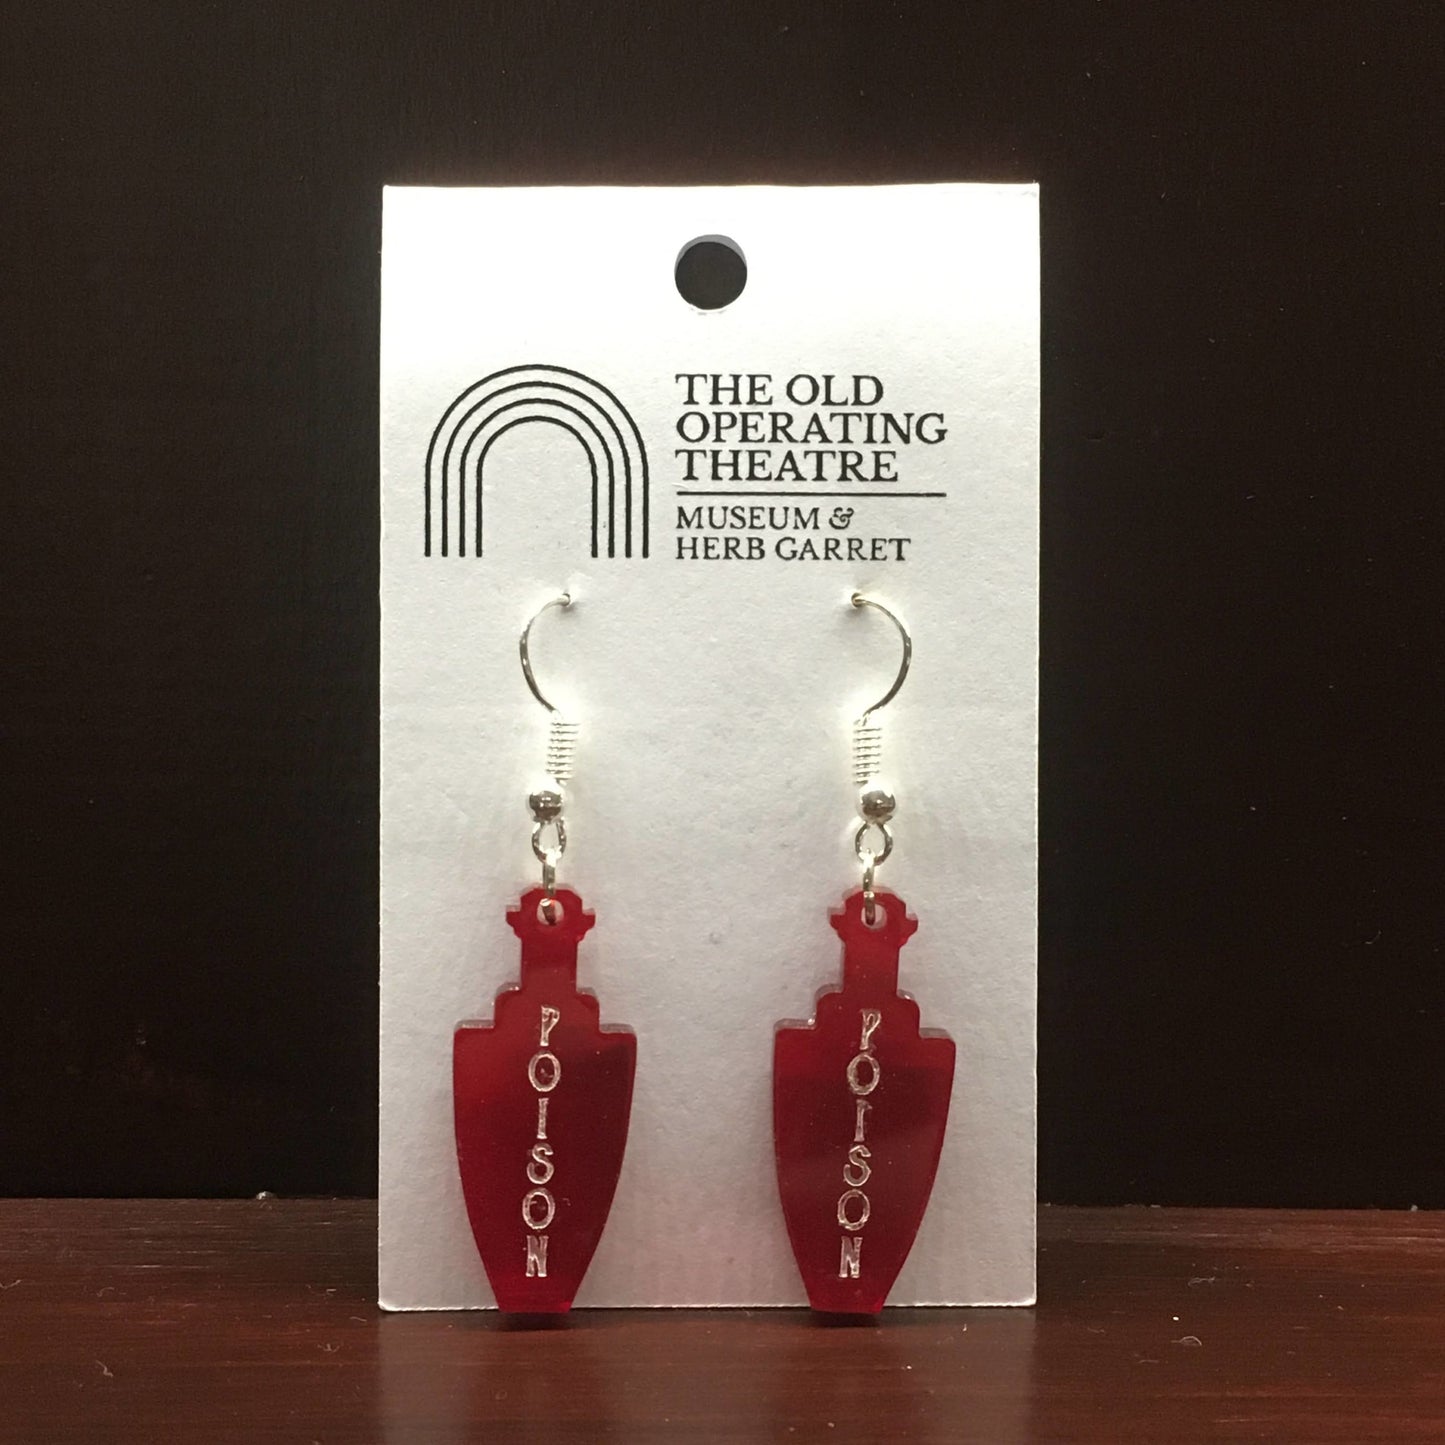 Pair of red dangle earrings in the shape of a bottle. 'Poison' is written vertically on the bottle.